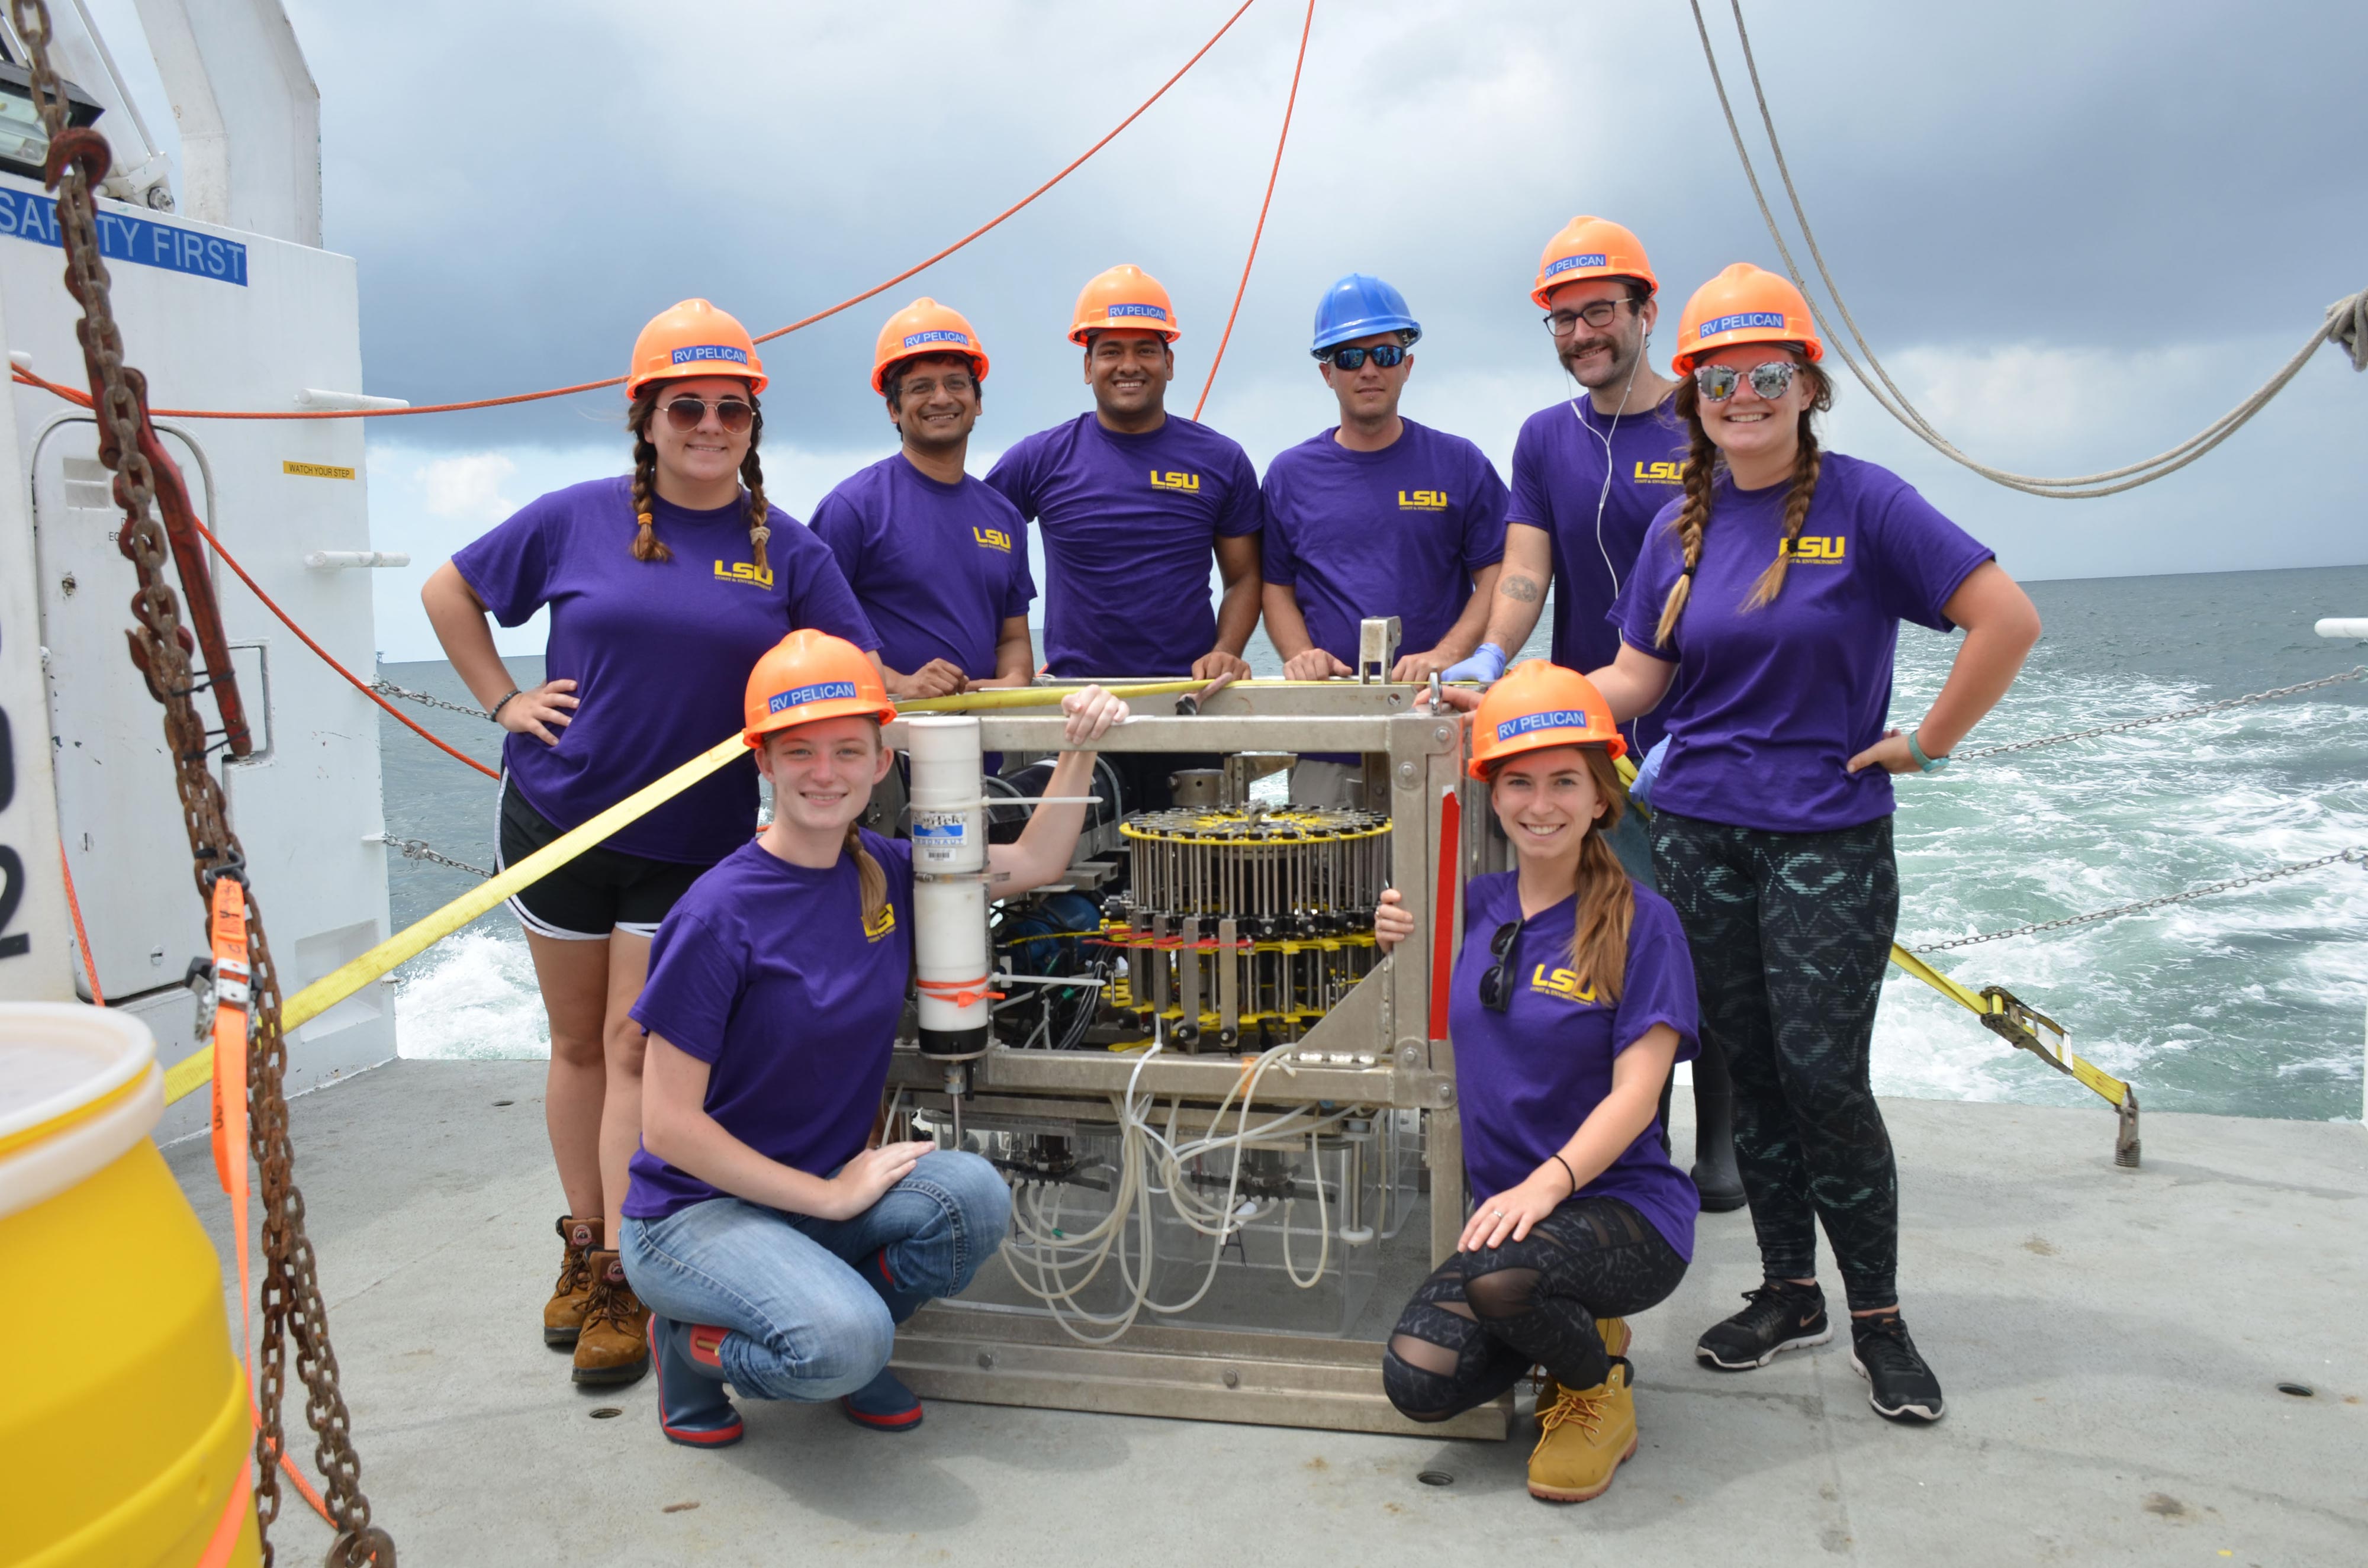 a group of people in matching shirts and helmets pose with scientific equipment on a ship